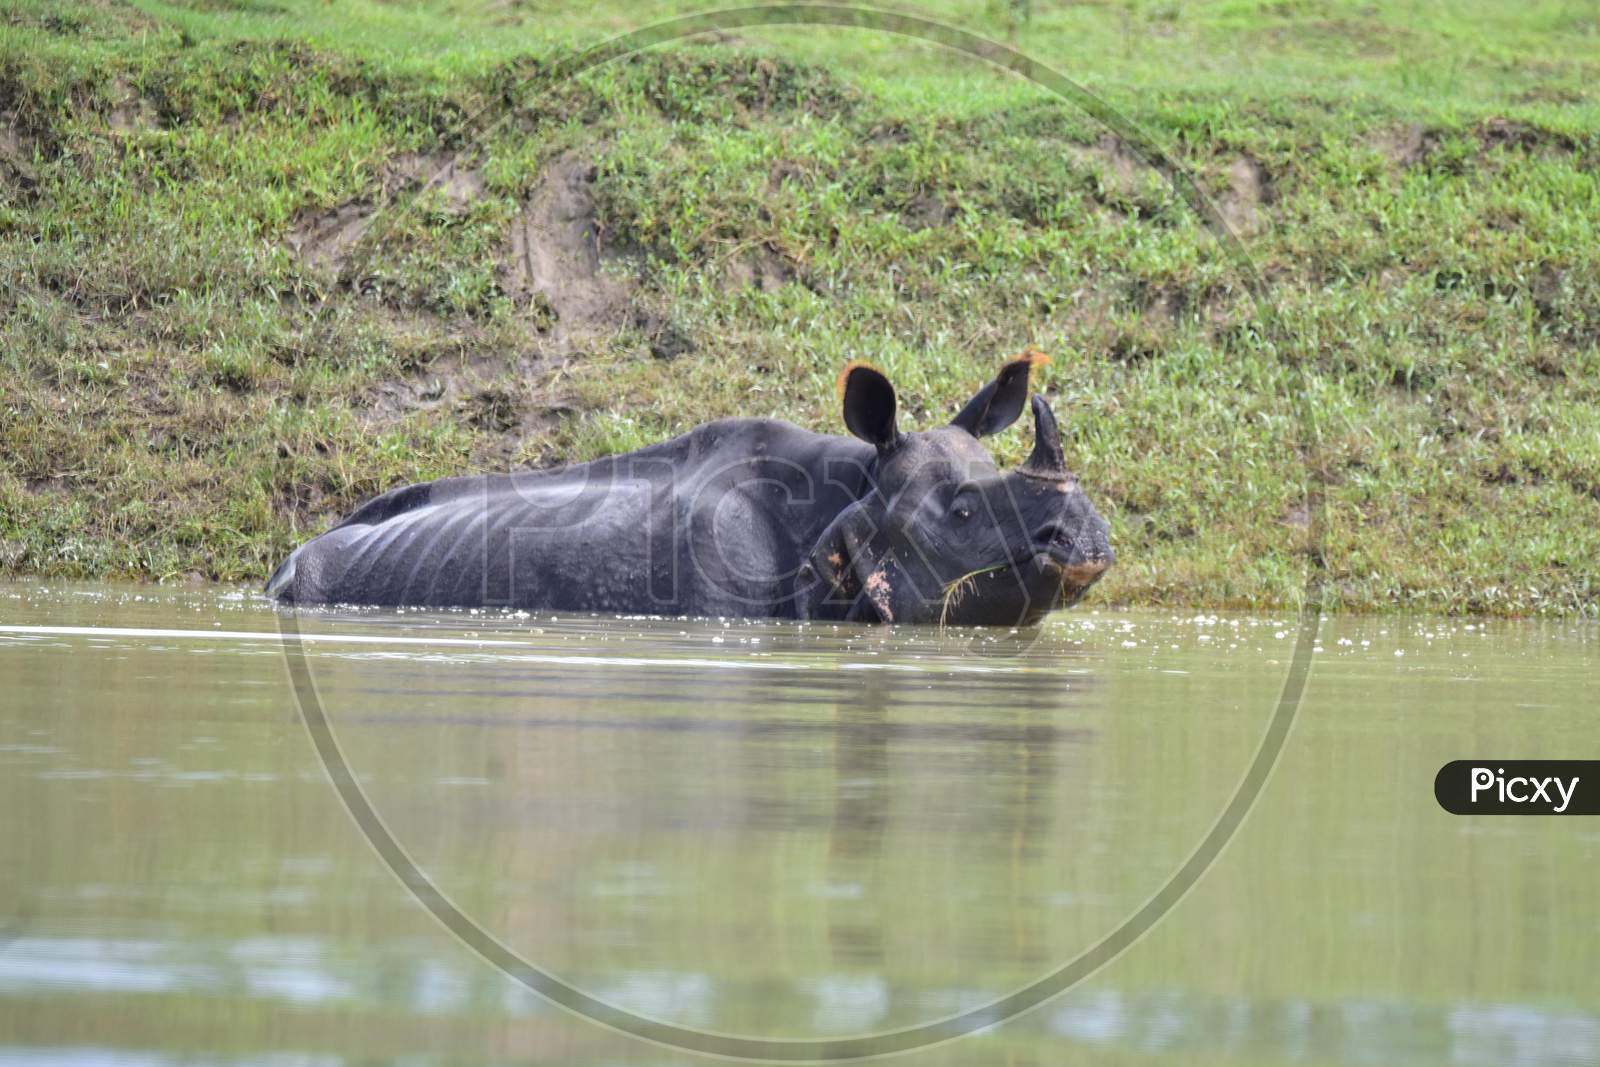 A one-horned rhino stands in flooded waters inside the Kaziranga National Park in Nagaon, Assam on July 16, 2020